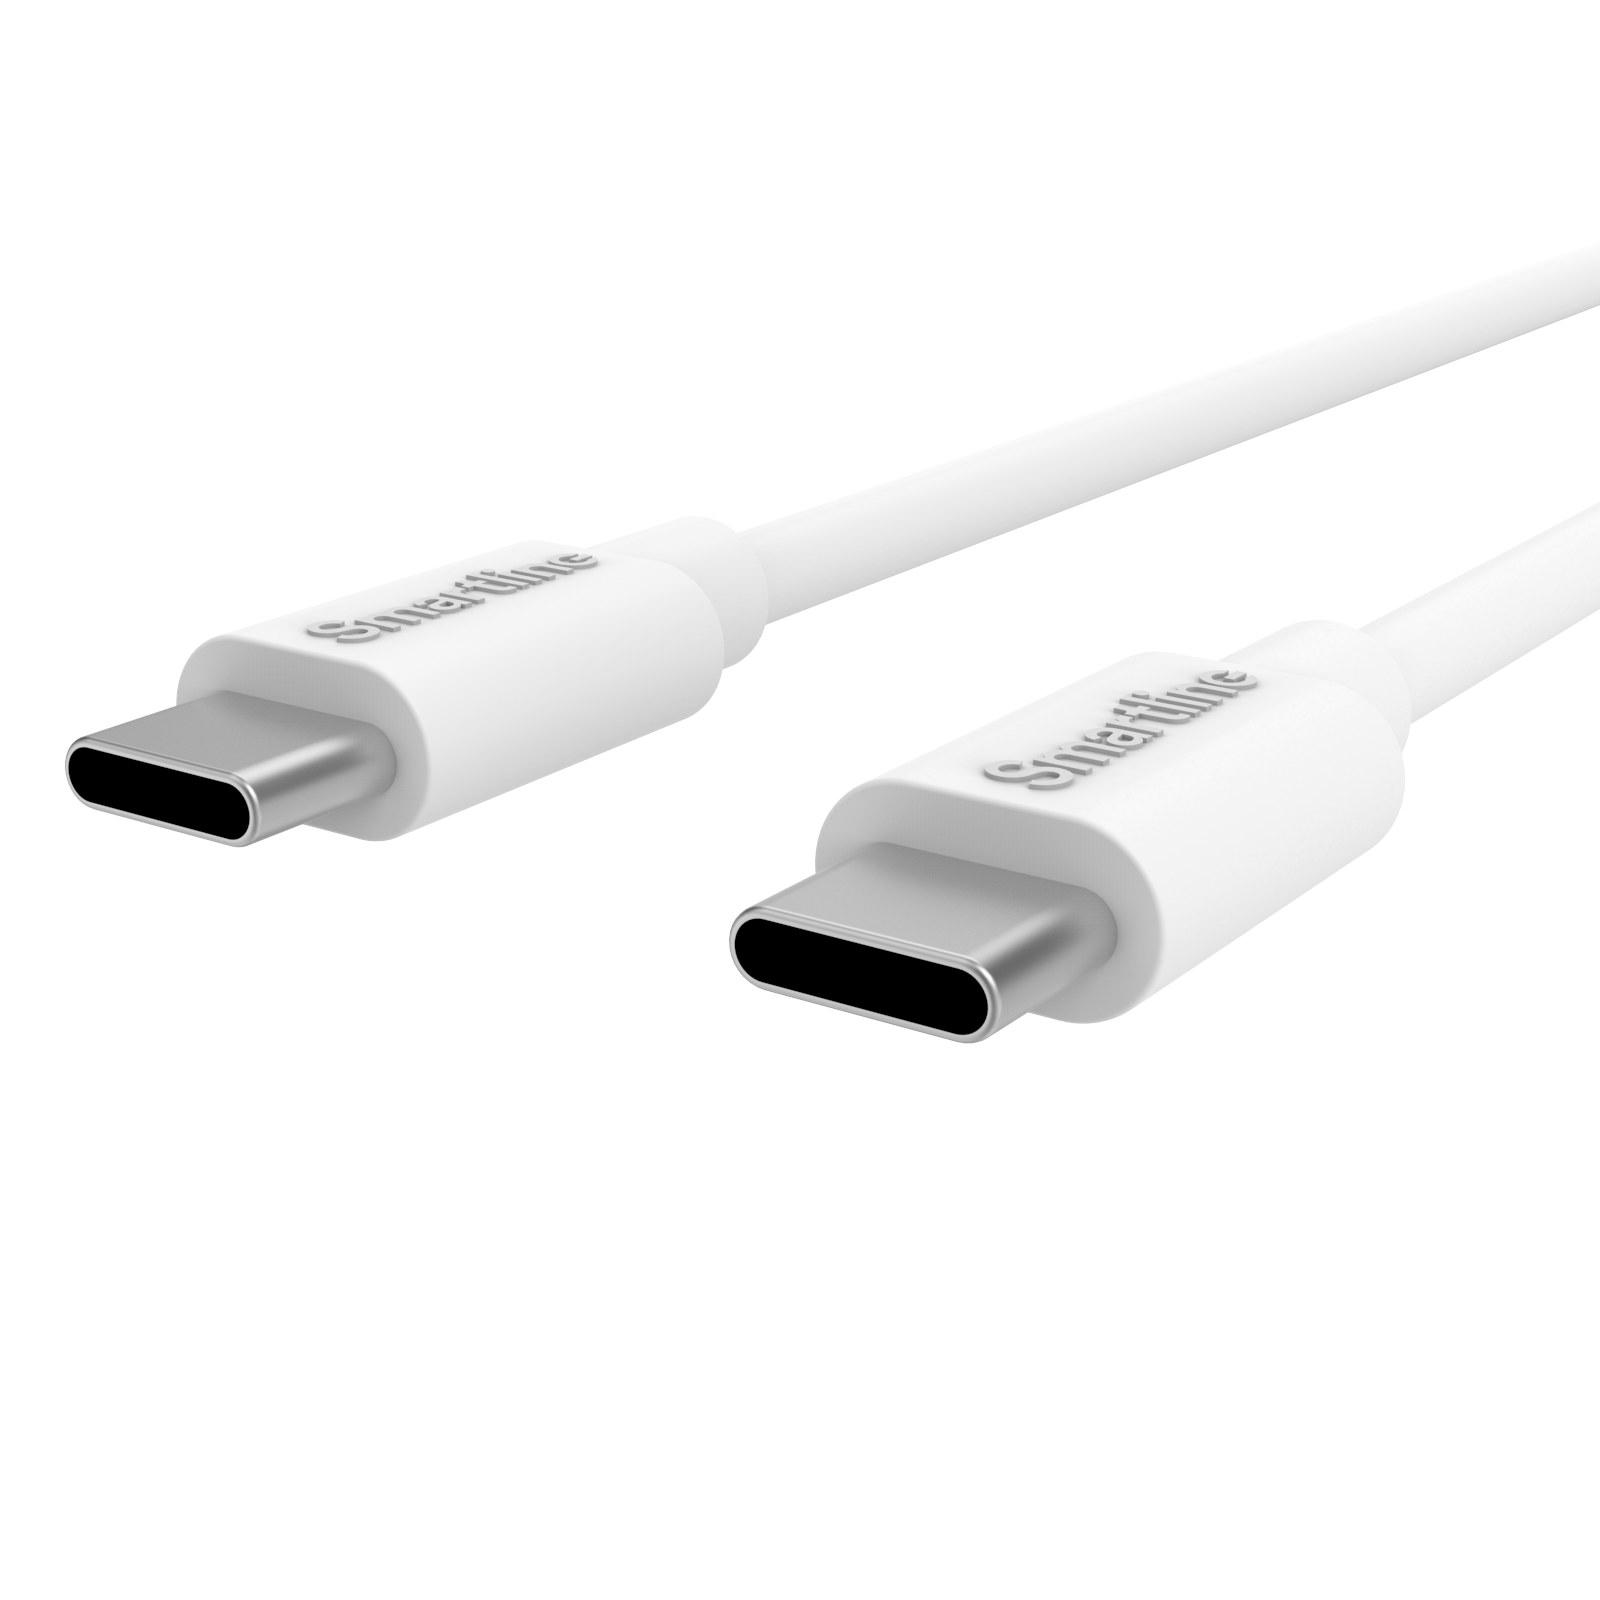 Complete Charger for Sony Xperia - 2m Cable and Wall Charger USB-C - Smartline